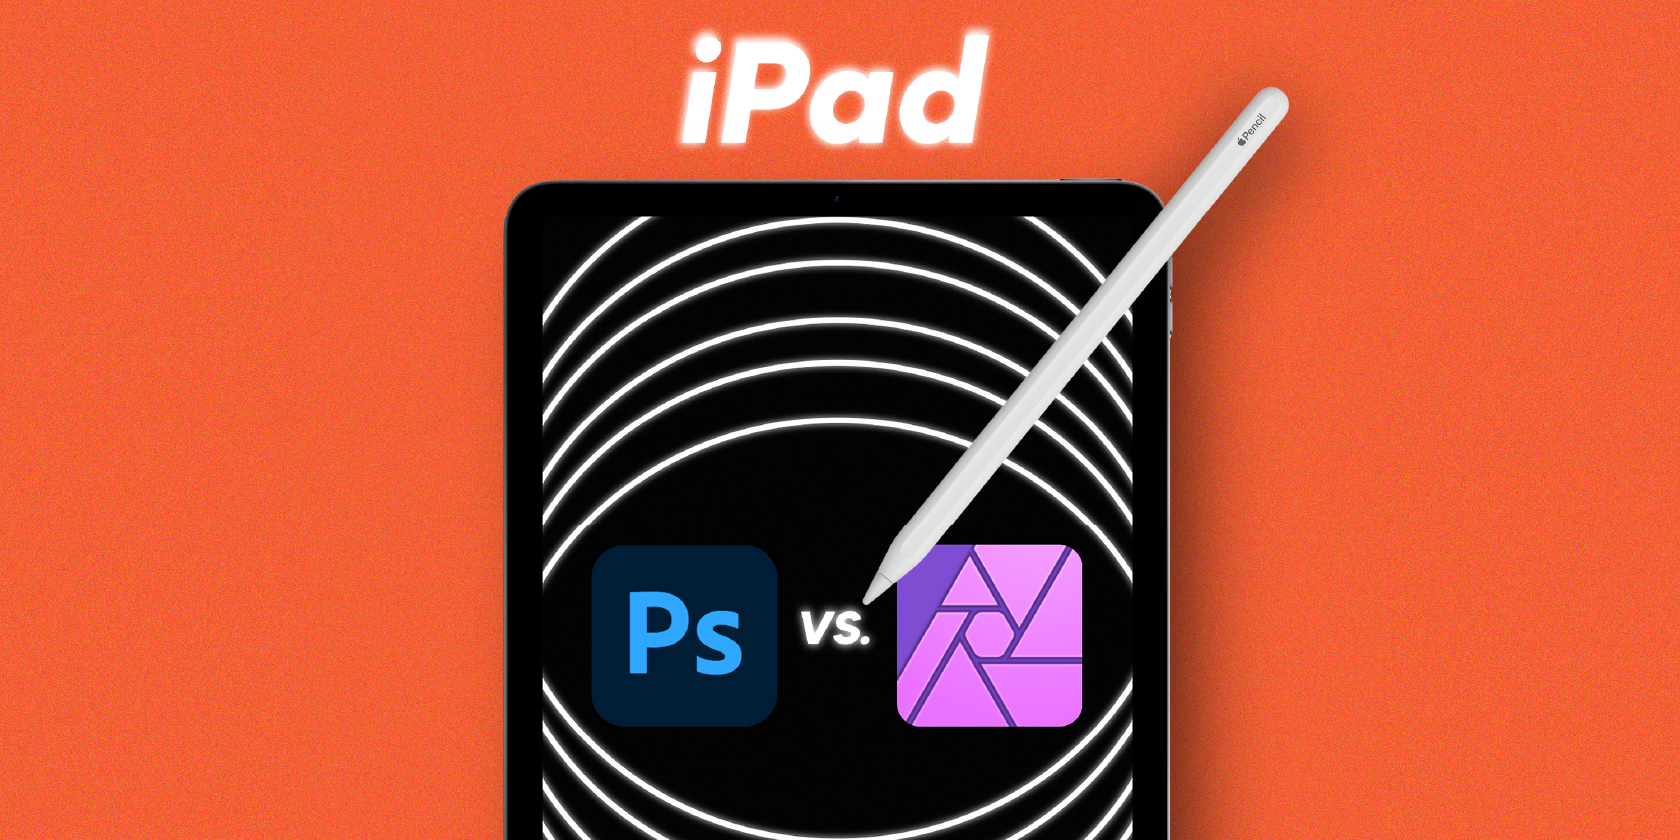 Adobe Photoshop for iPad vs. Affinity Photo for iPad: Which Is Best?